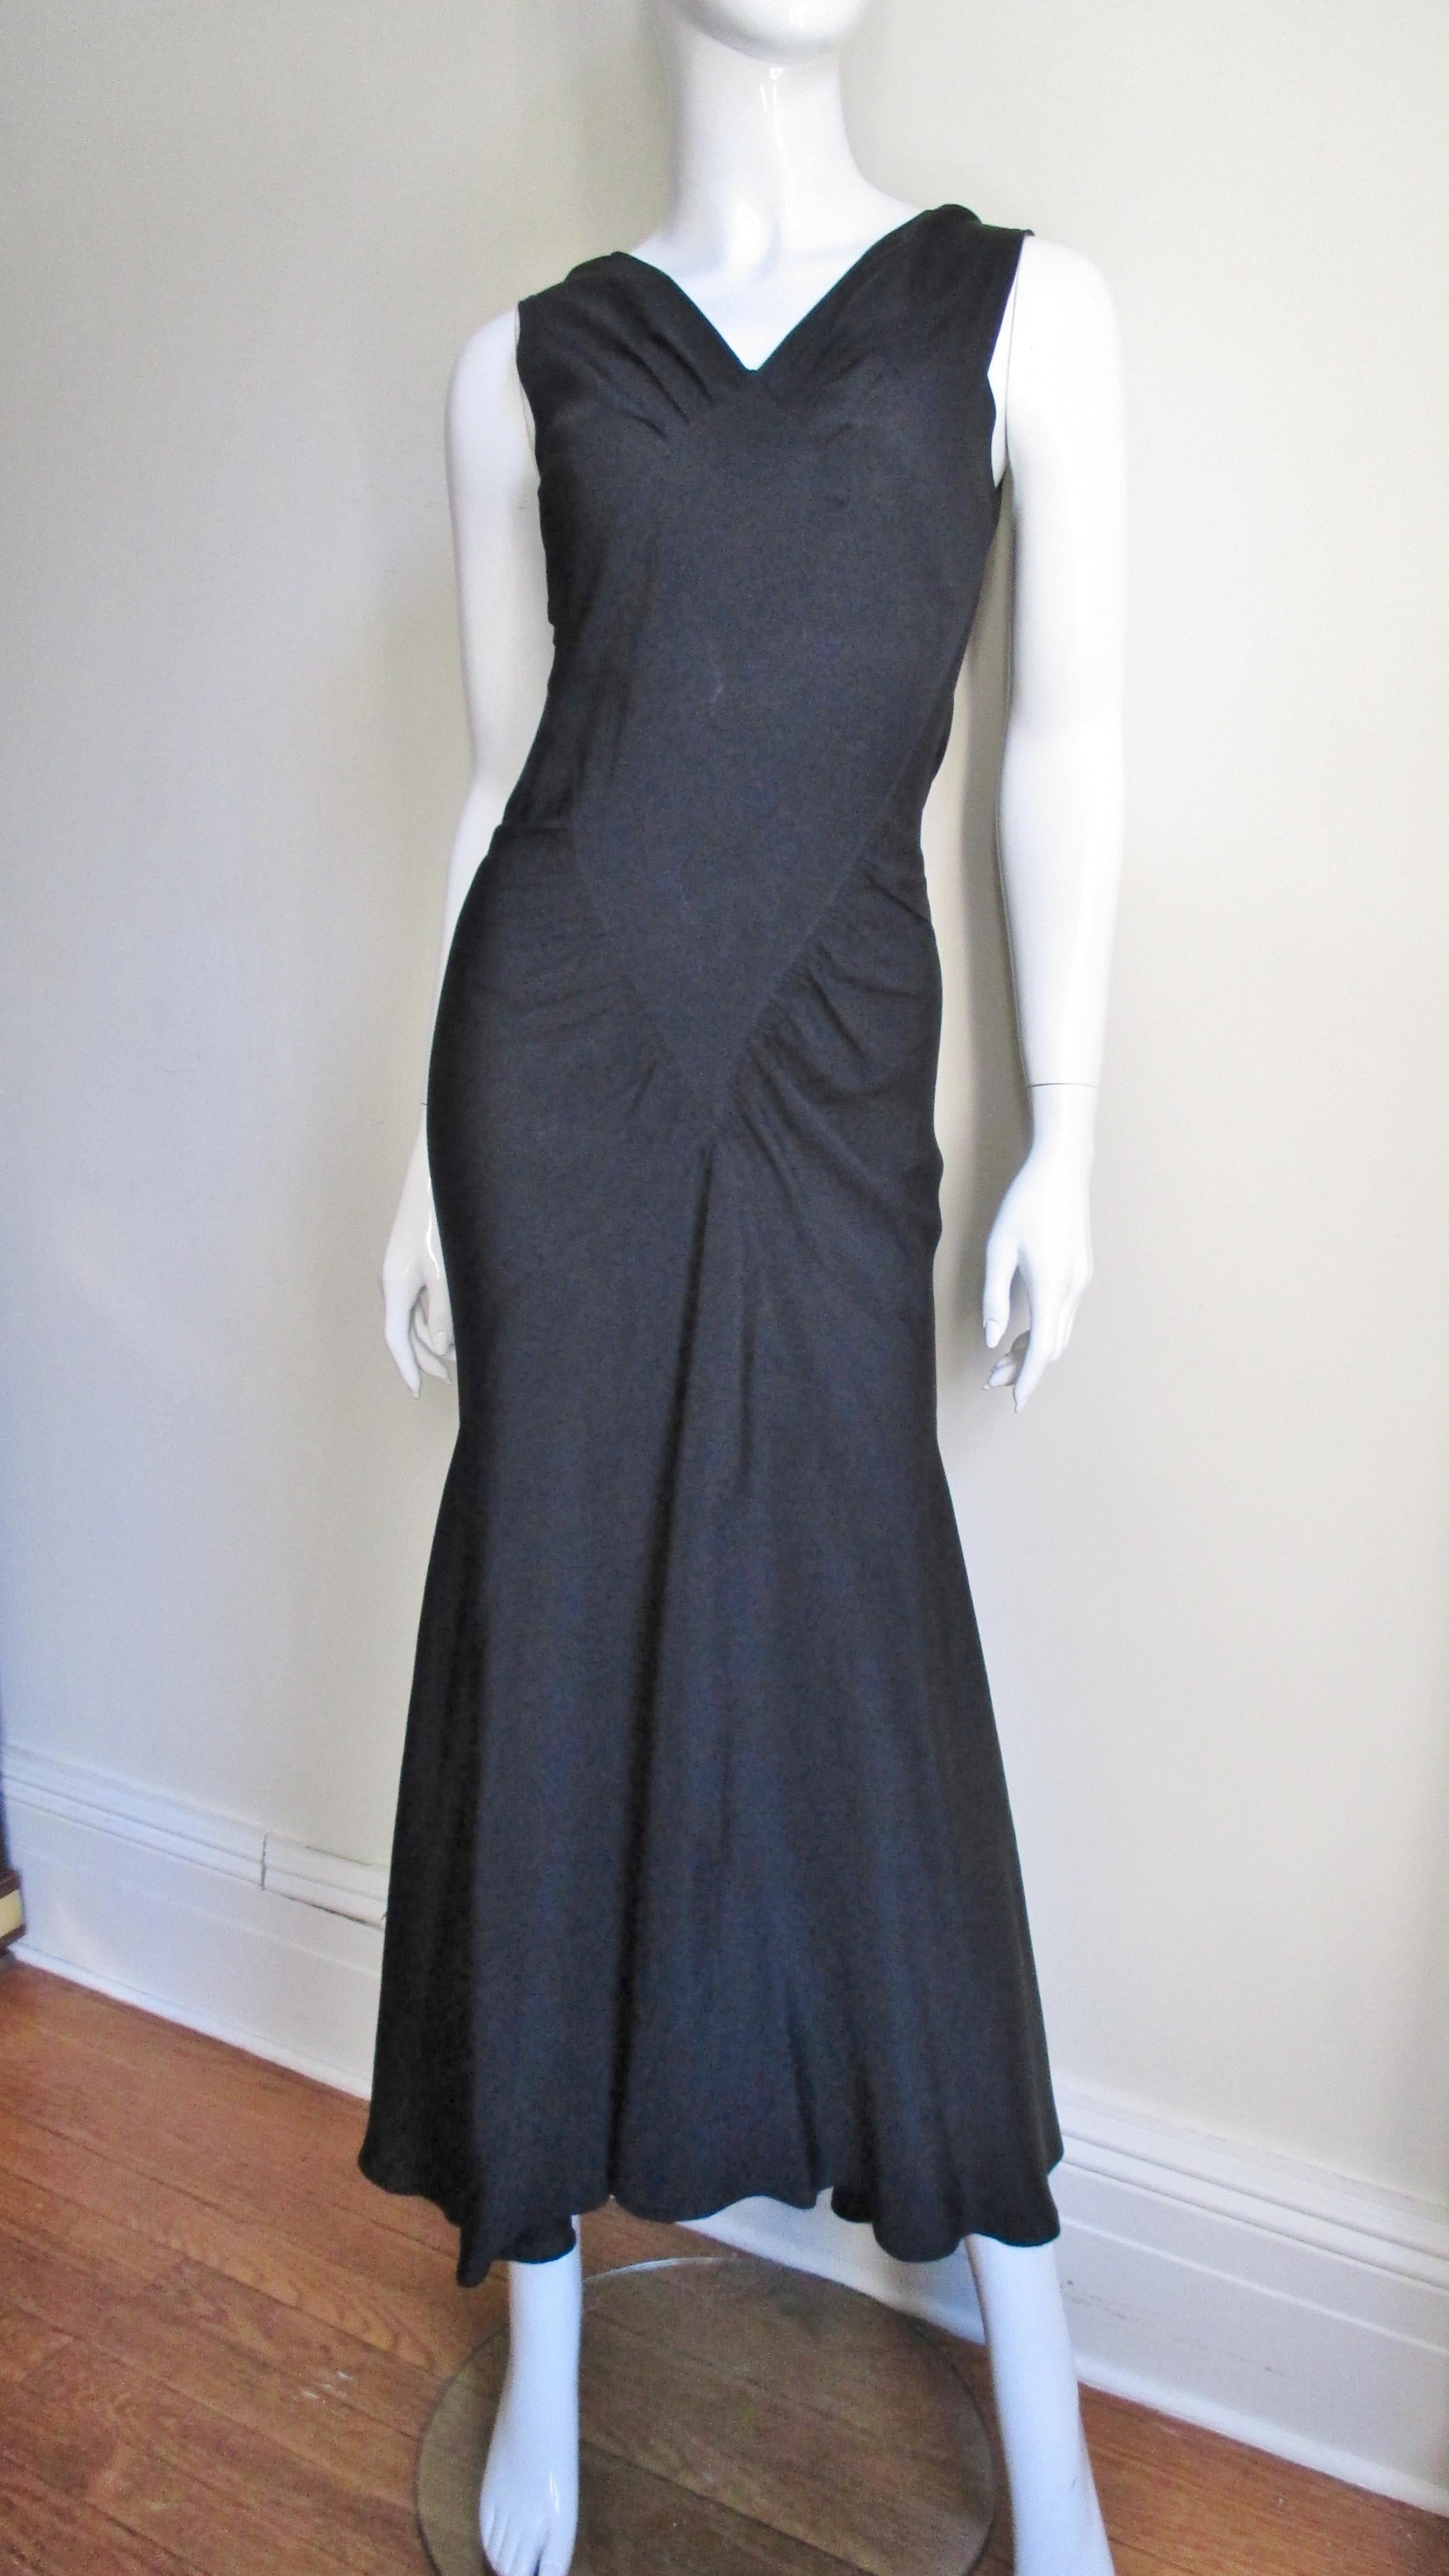 A black silk 1930's gown with incredible seaming and lines.  The front has lightly shirred panels sewn onto a diamond shaped front panel.  It is sleeveless with a V neck front and scoop back.  Fitted through the torso via the shirring and triangular